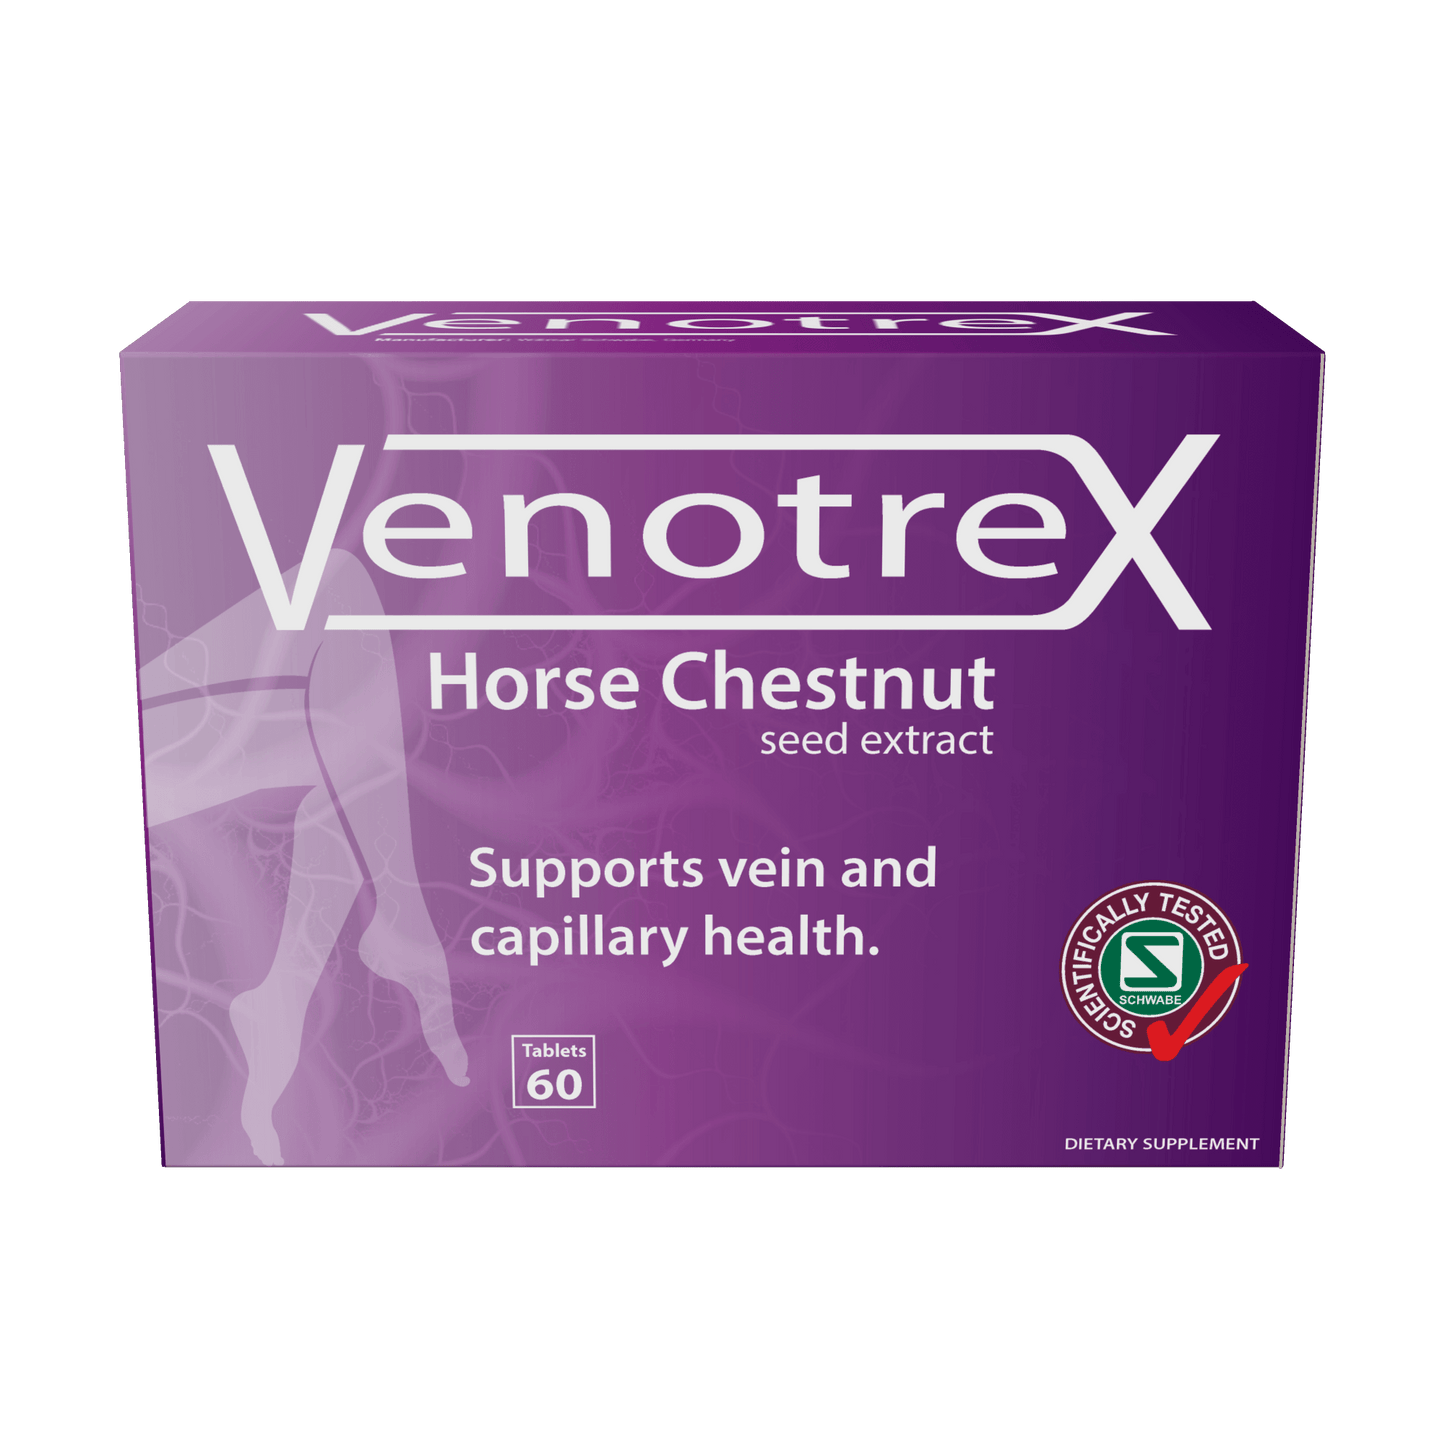 Venotrex Horse Chestnut Seed Extract 60 tablets